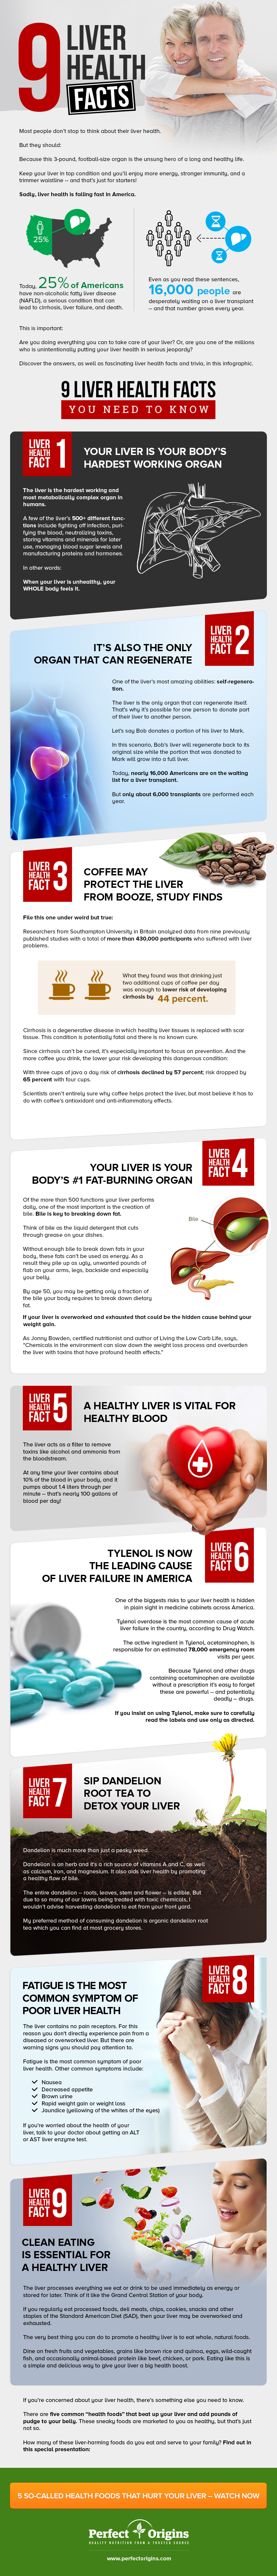 liver health facts